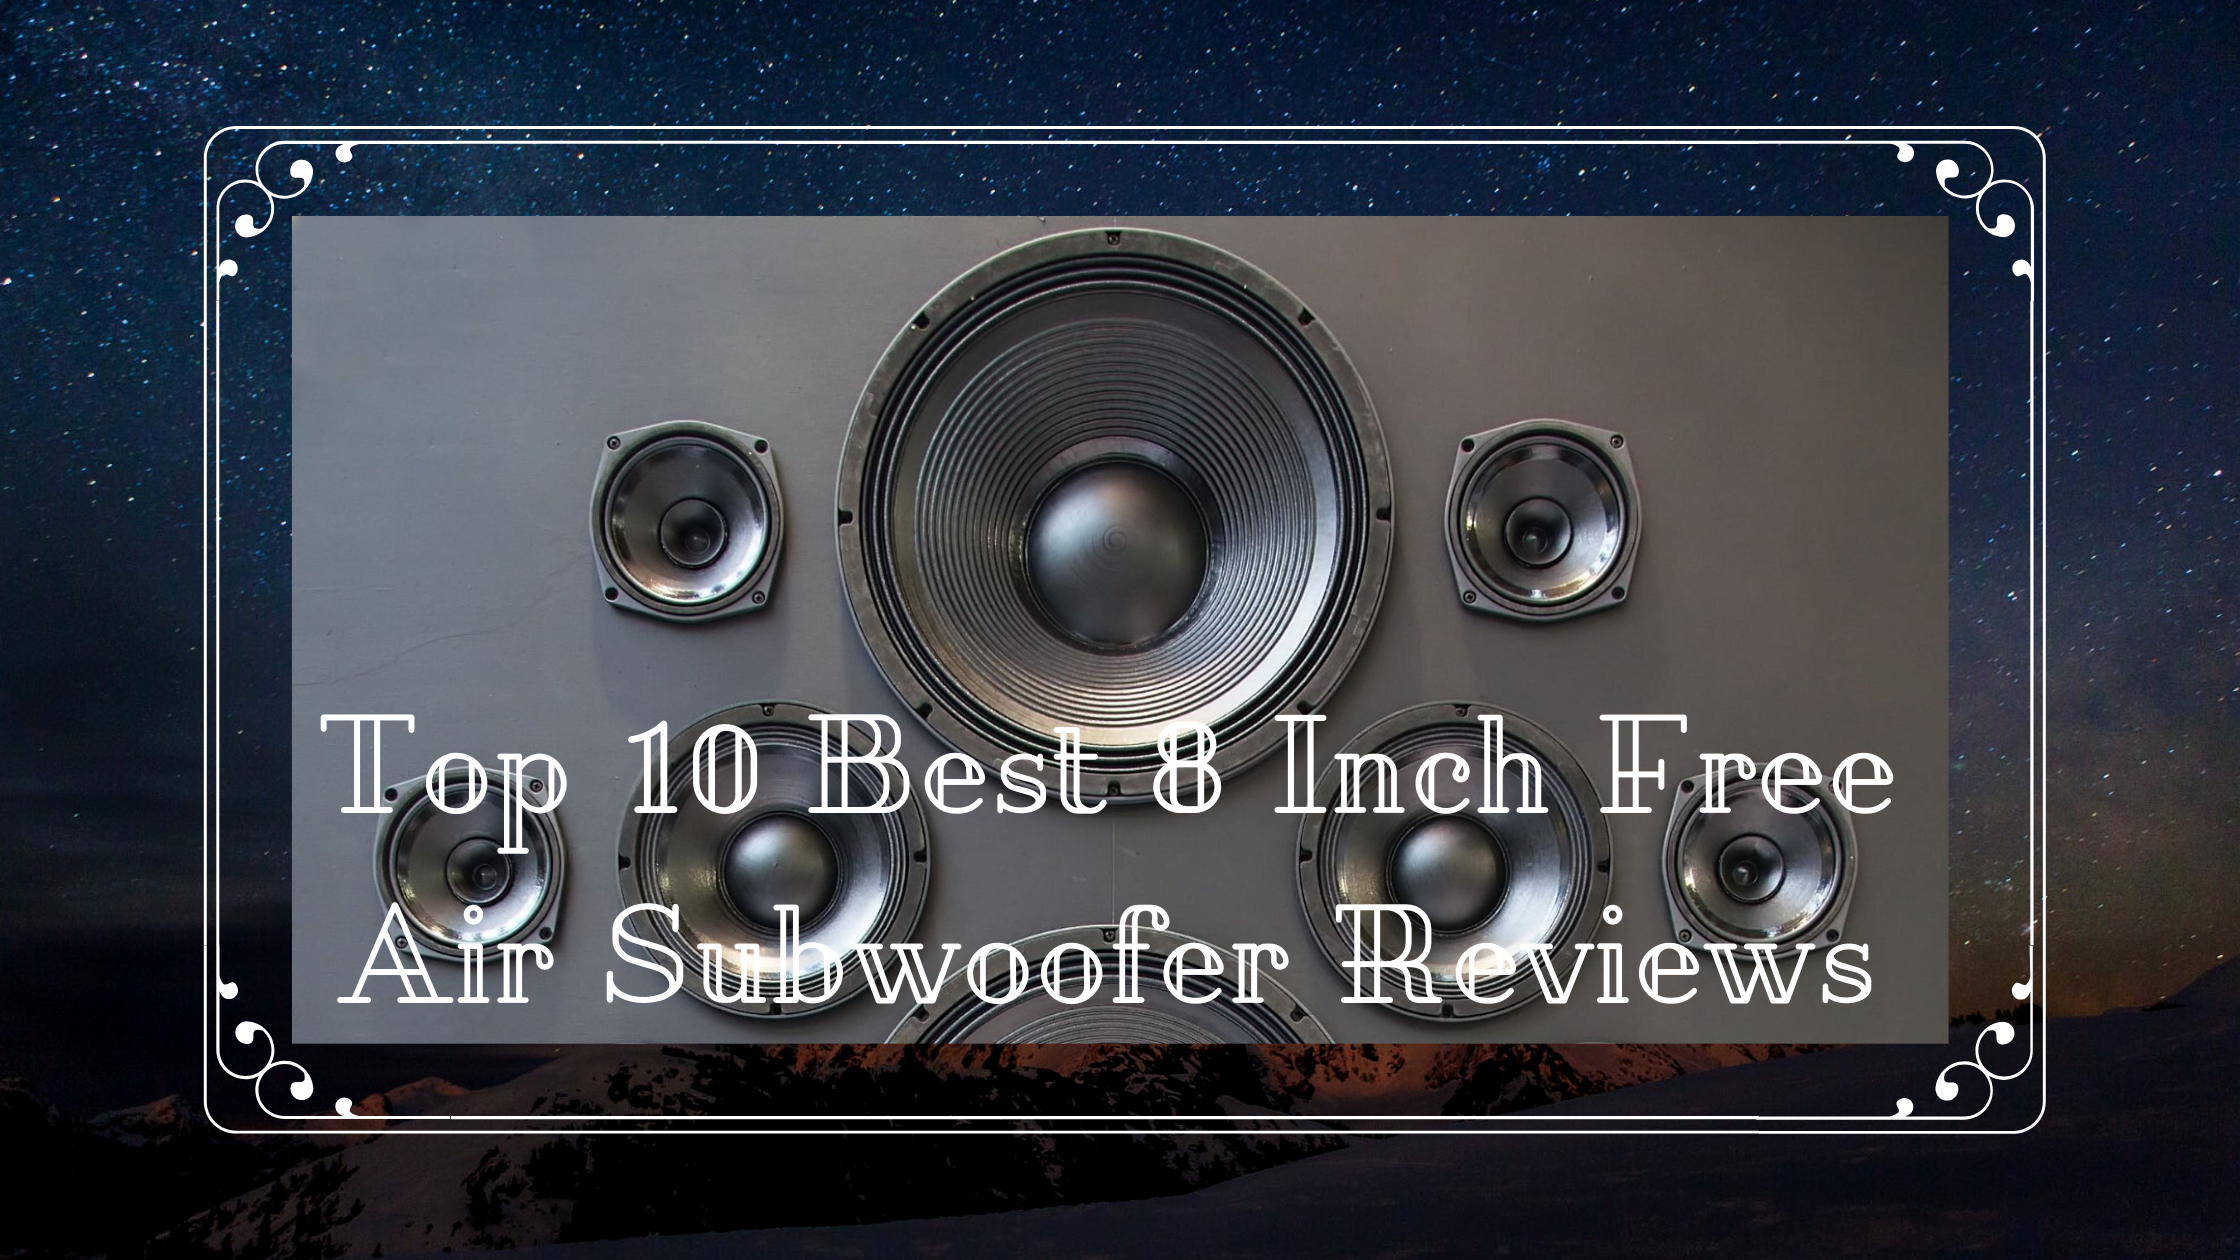 Top 10 Best 8 Inch Free Air Subwoofer Reviews